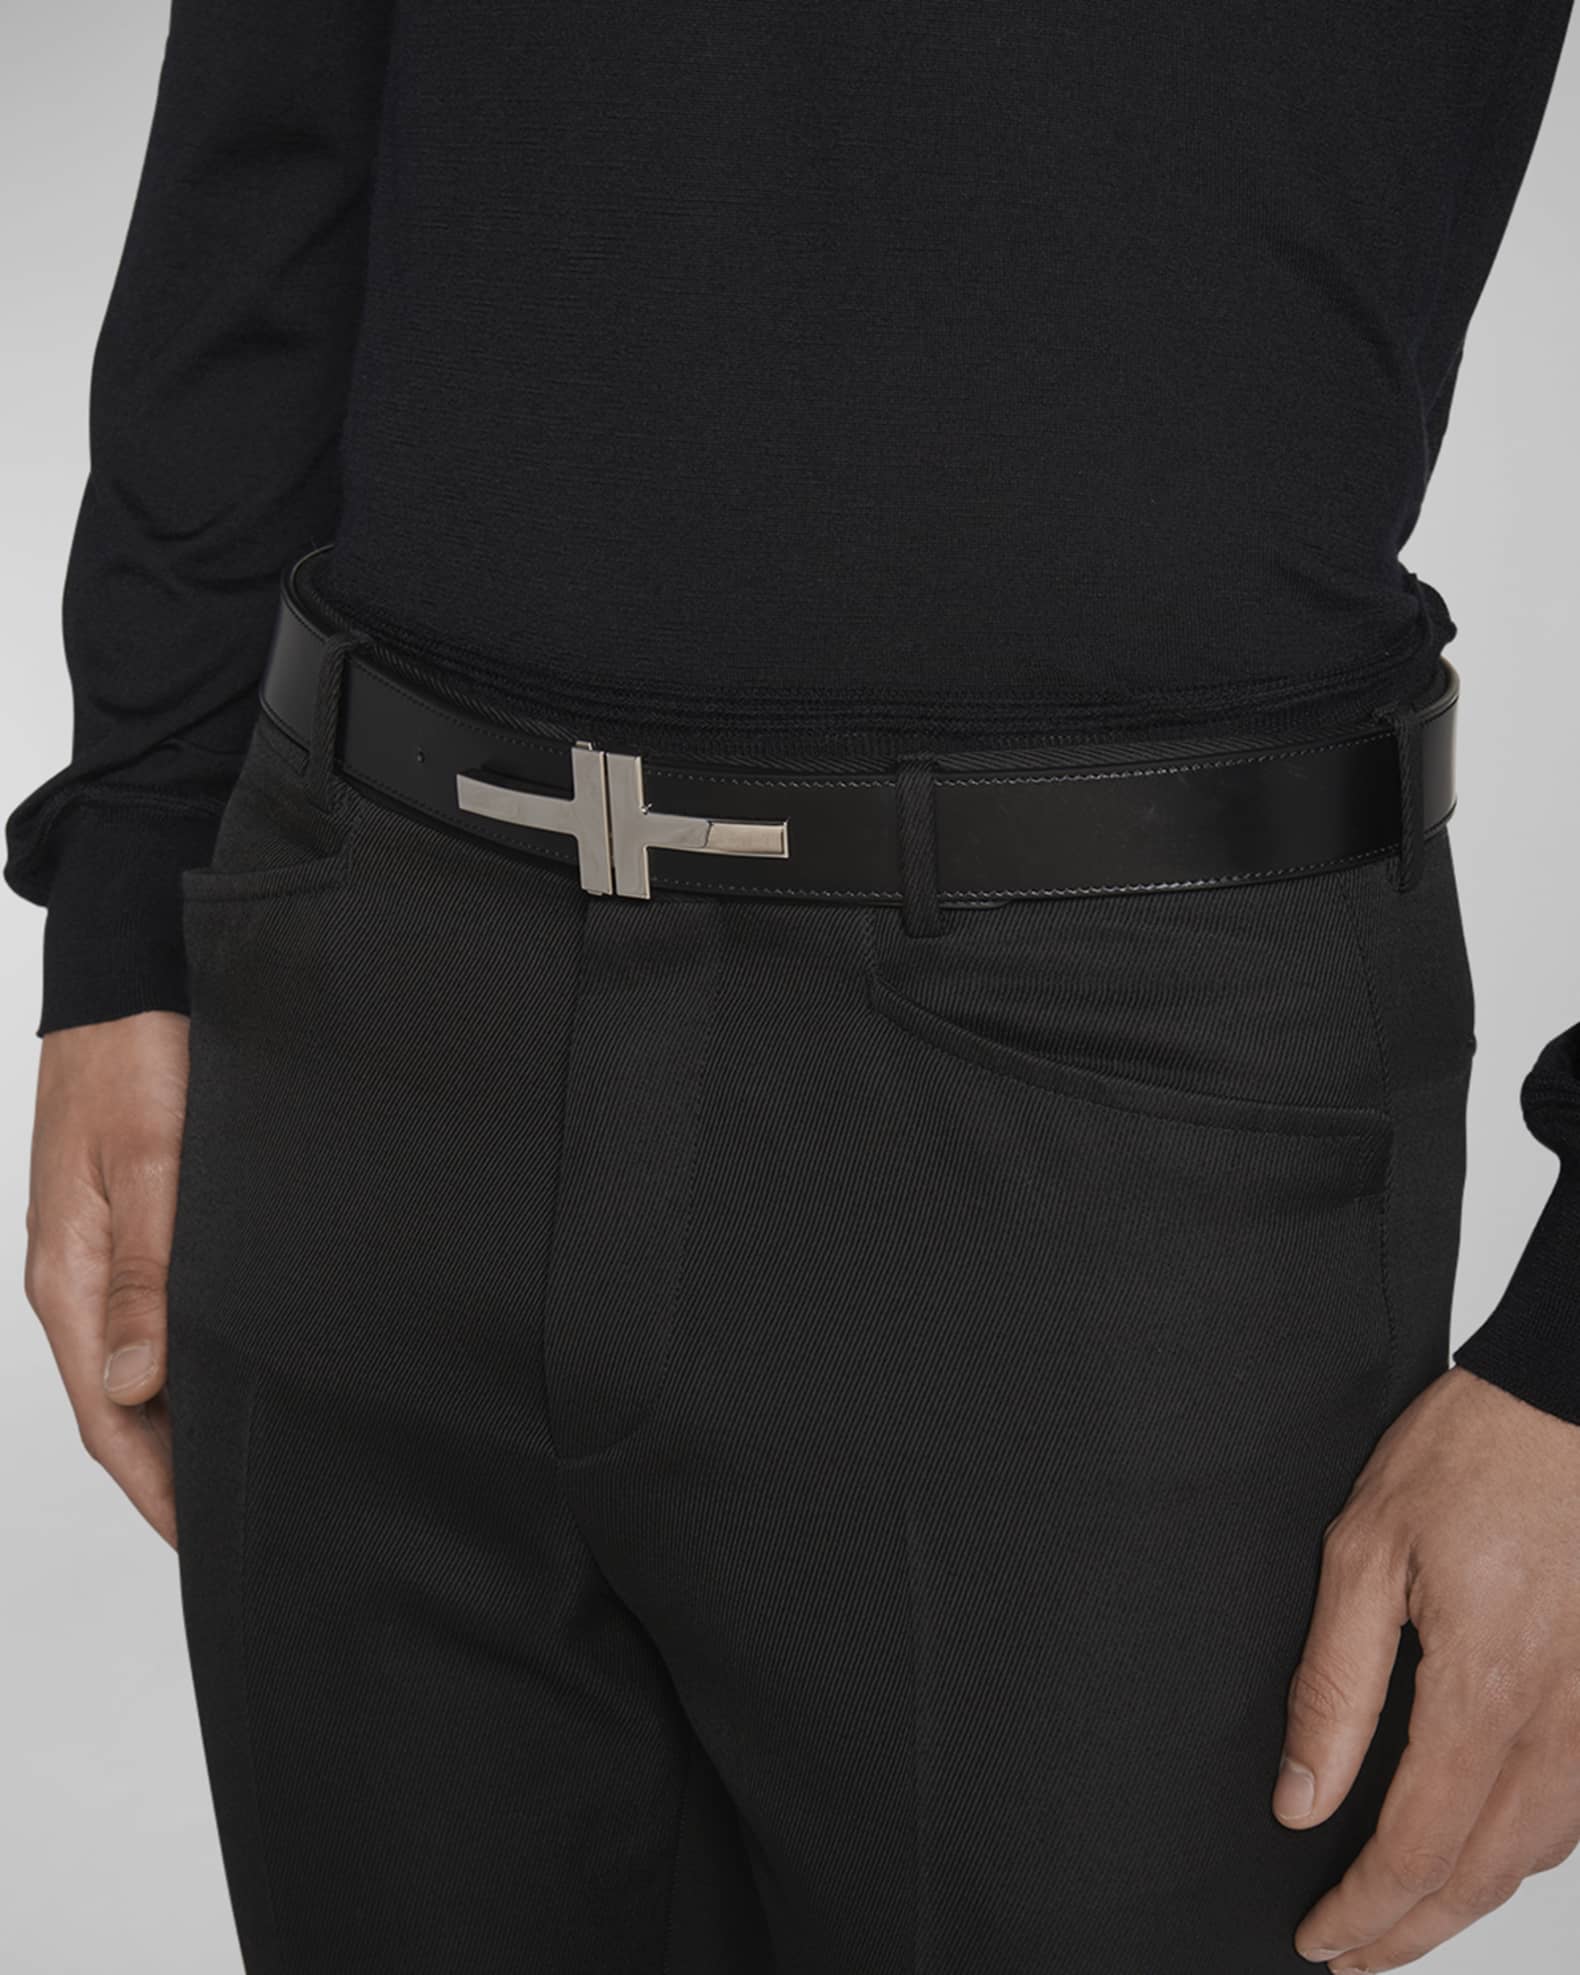 TOM FORD Men's Double T Leather Belt | Neiman Marcus